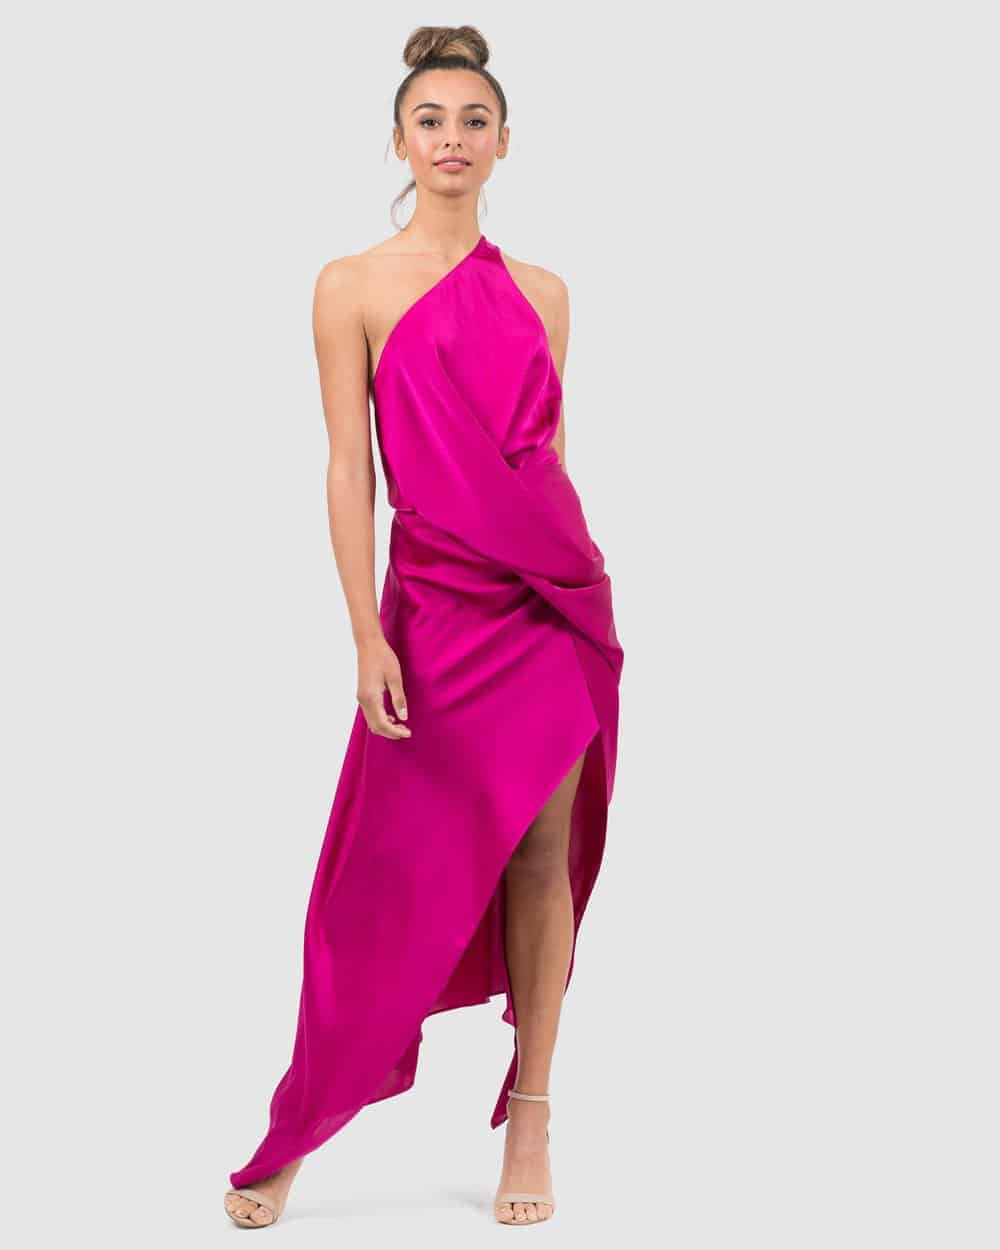 One Fell Swoop Philly Dress - Cardinal Pink - Get Dressed Hire